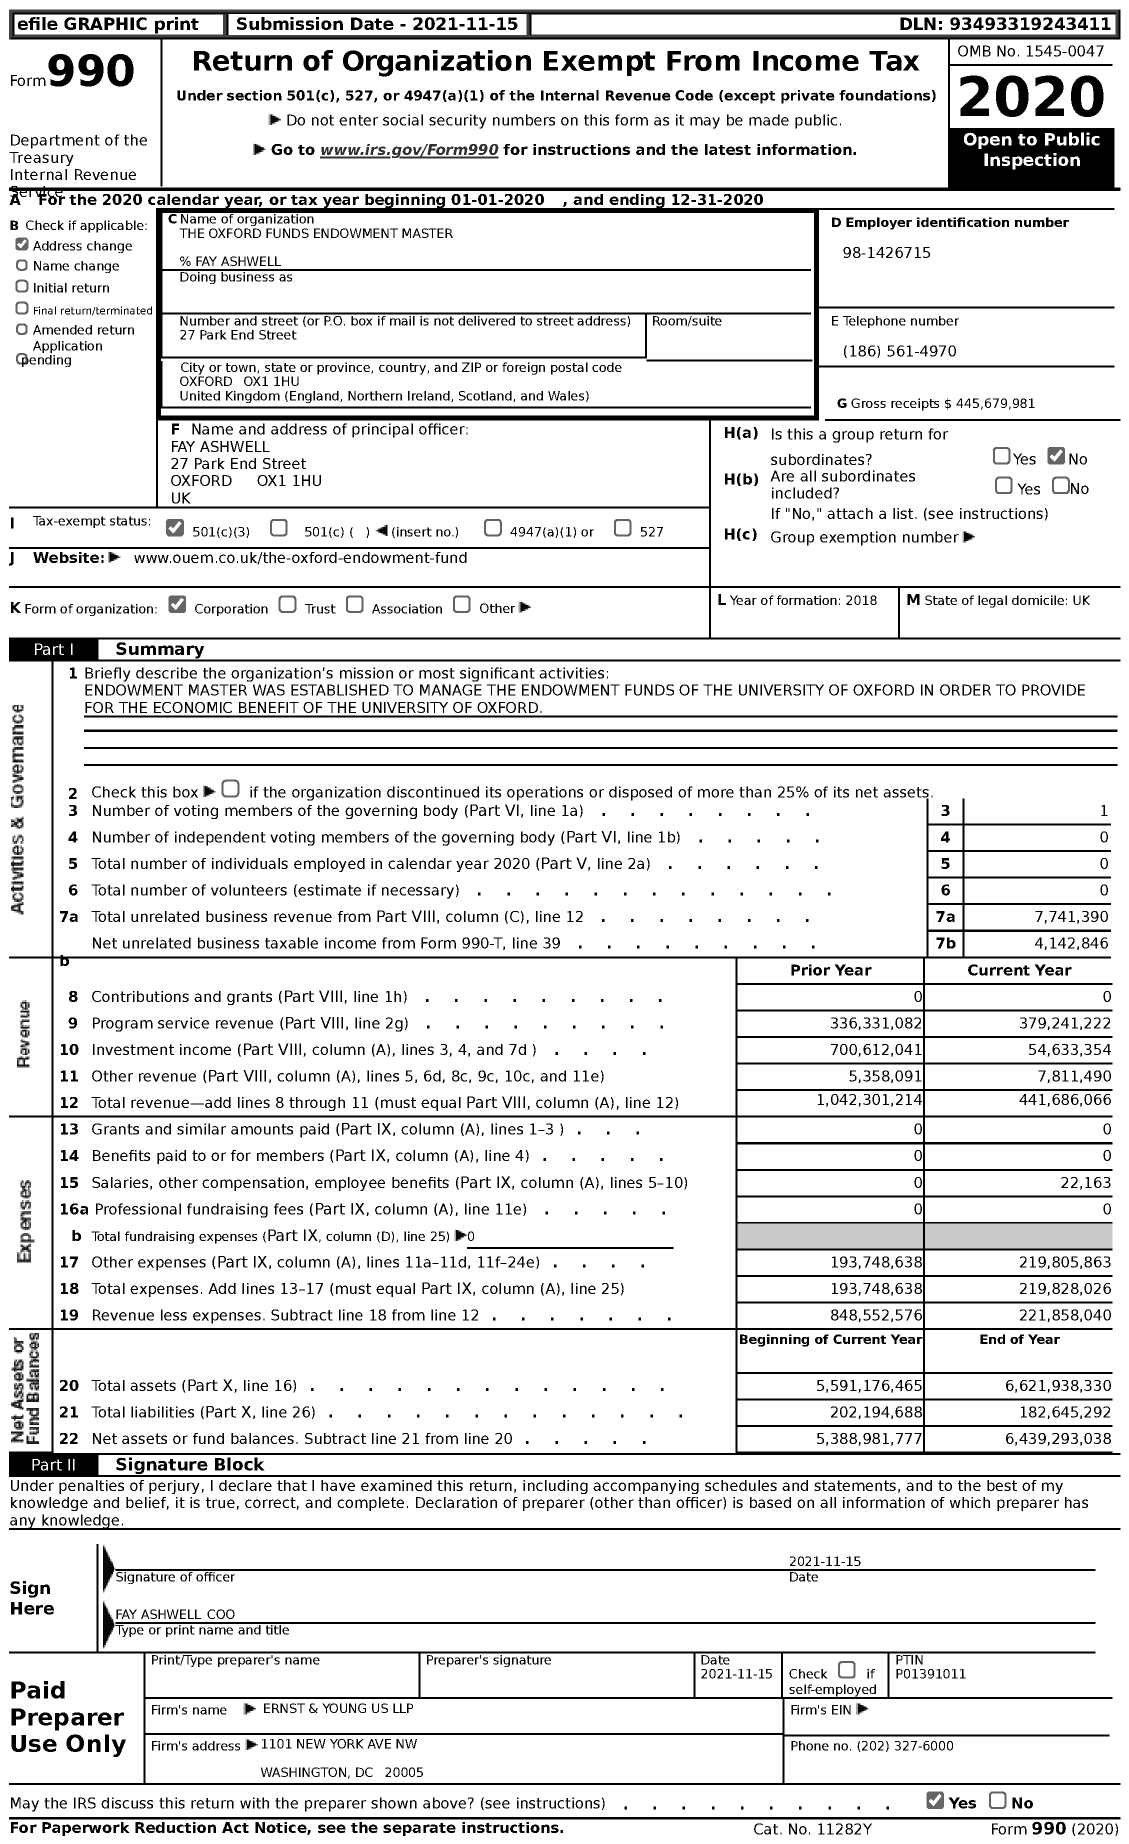 Image of first page of 2020 Form 990 for The Oxford Funds Endowment Master